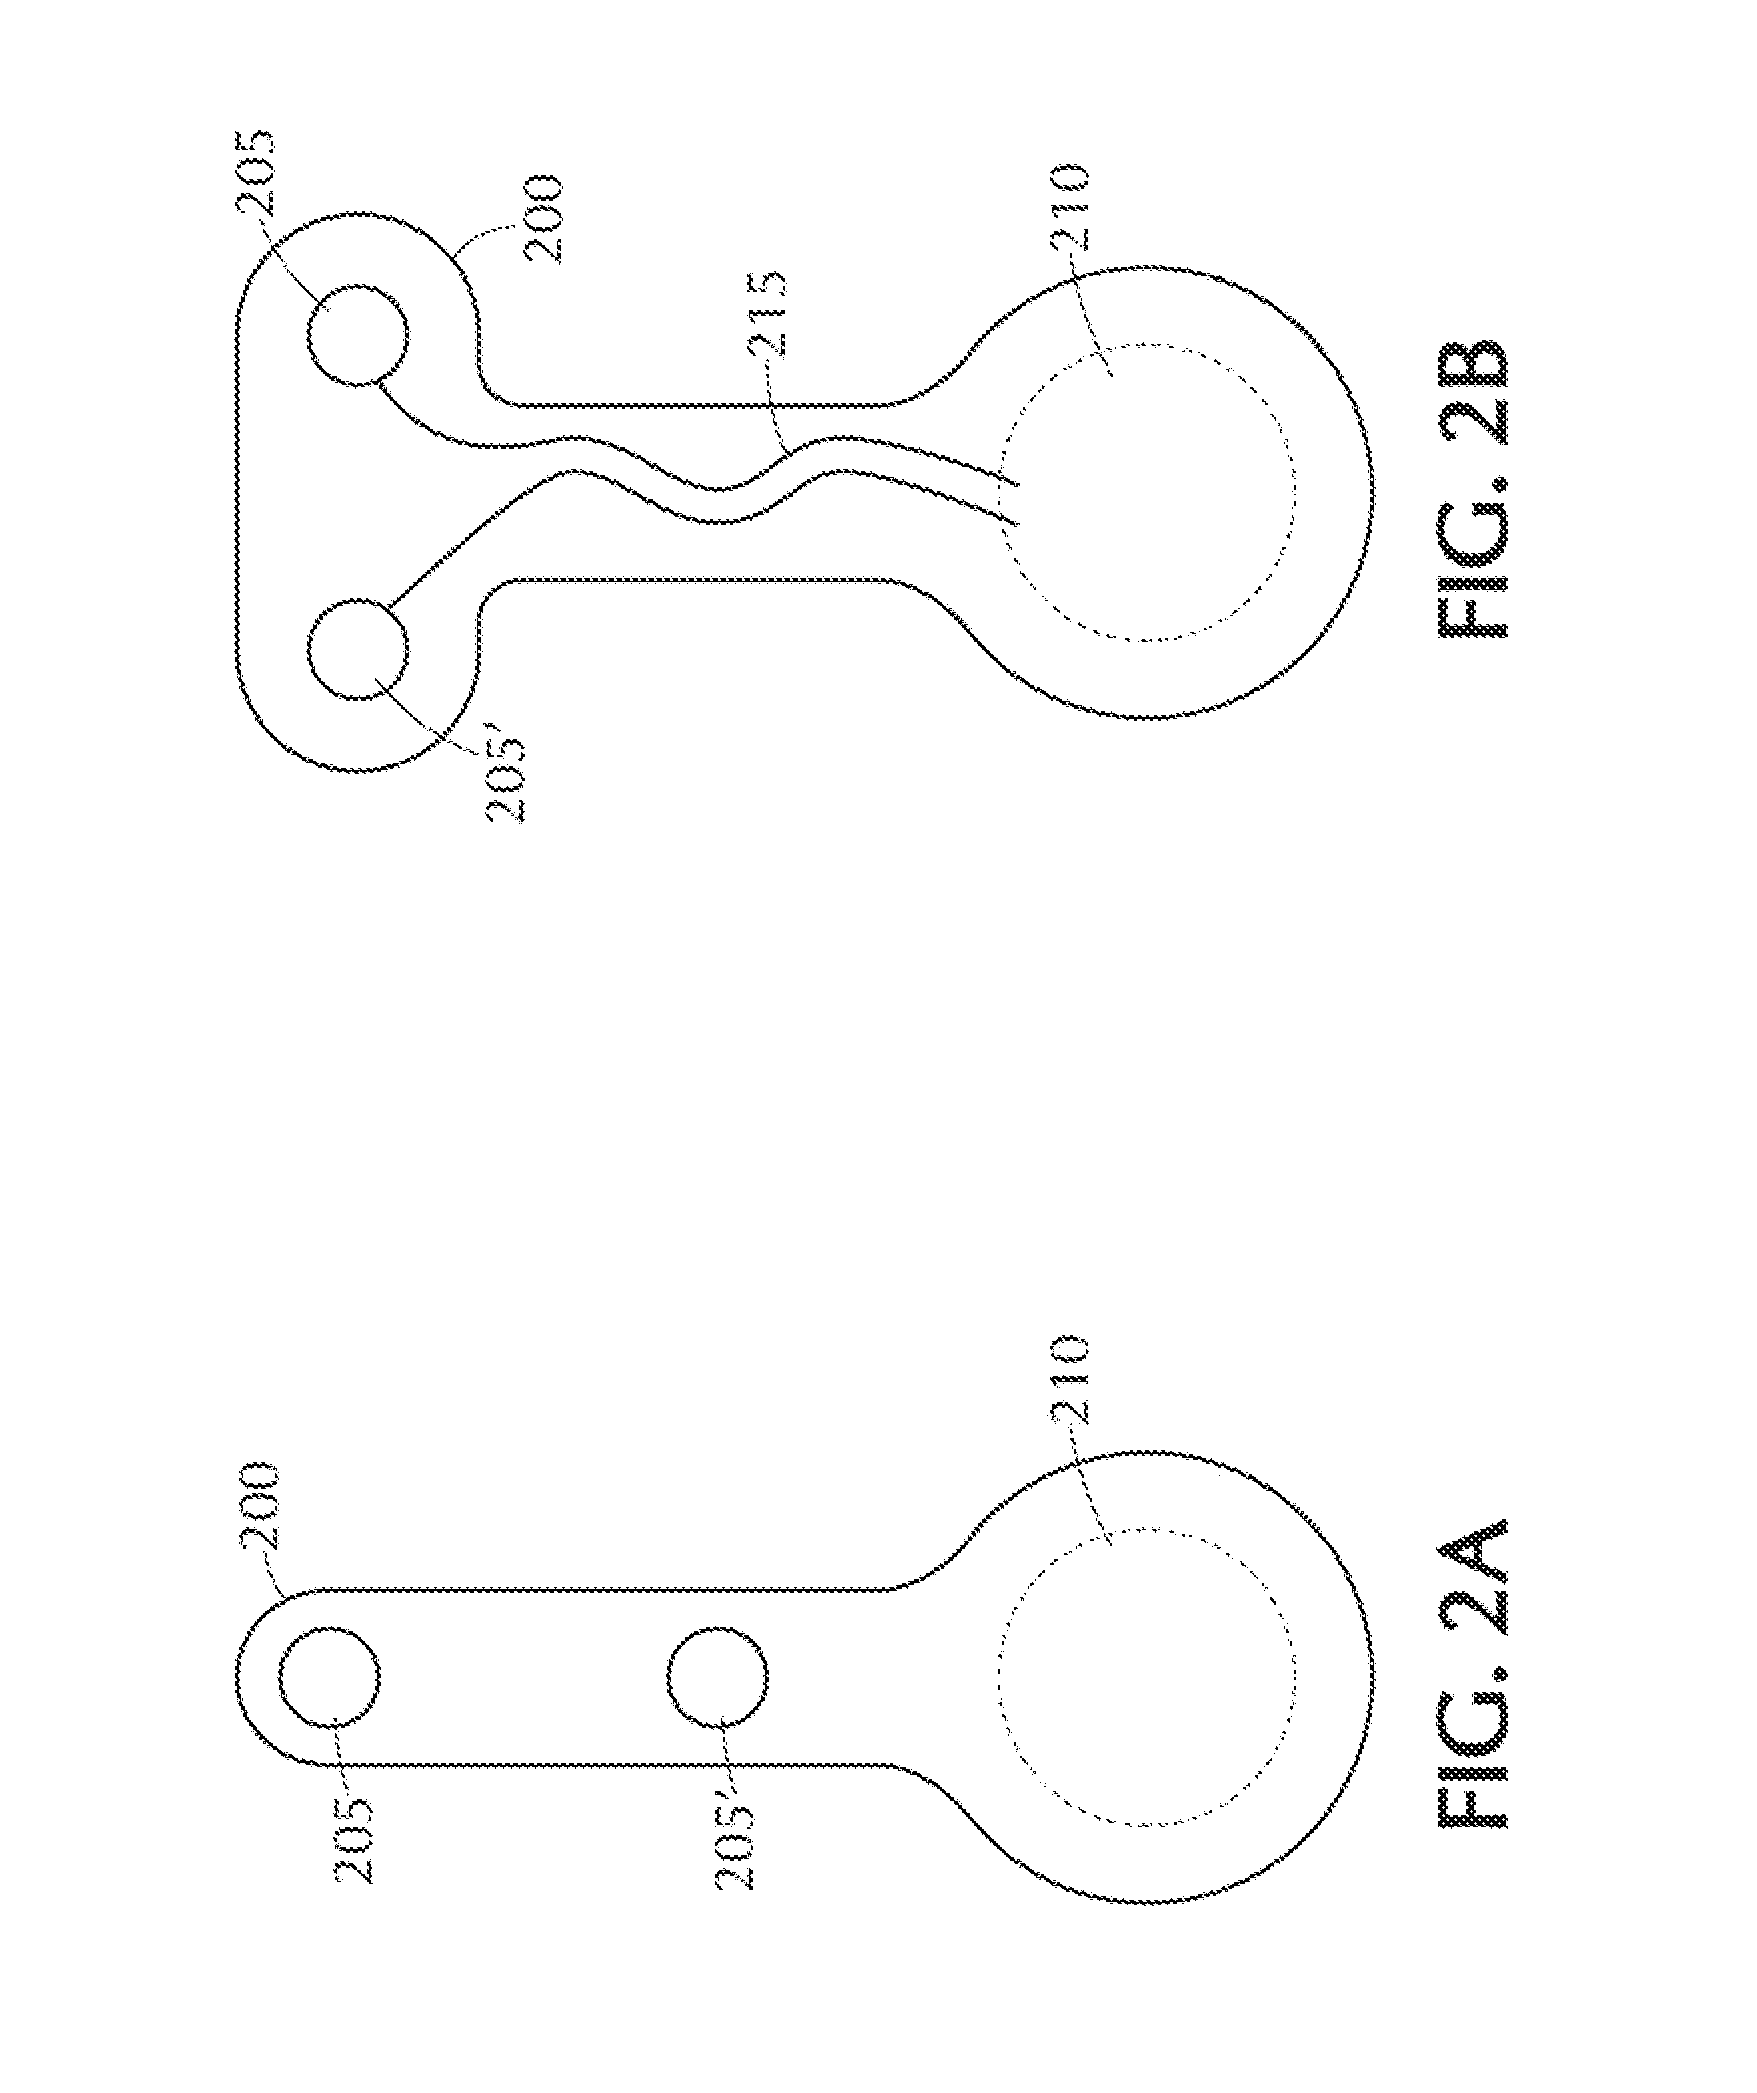 Device and method for self-positioning of a stimulation device to activate brown adipose tissue depot in a supraclavicular fossa region